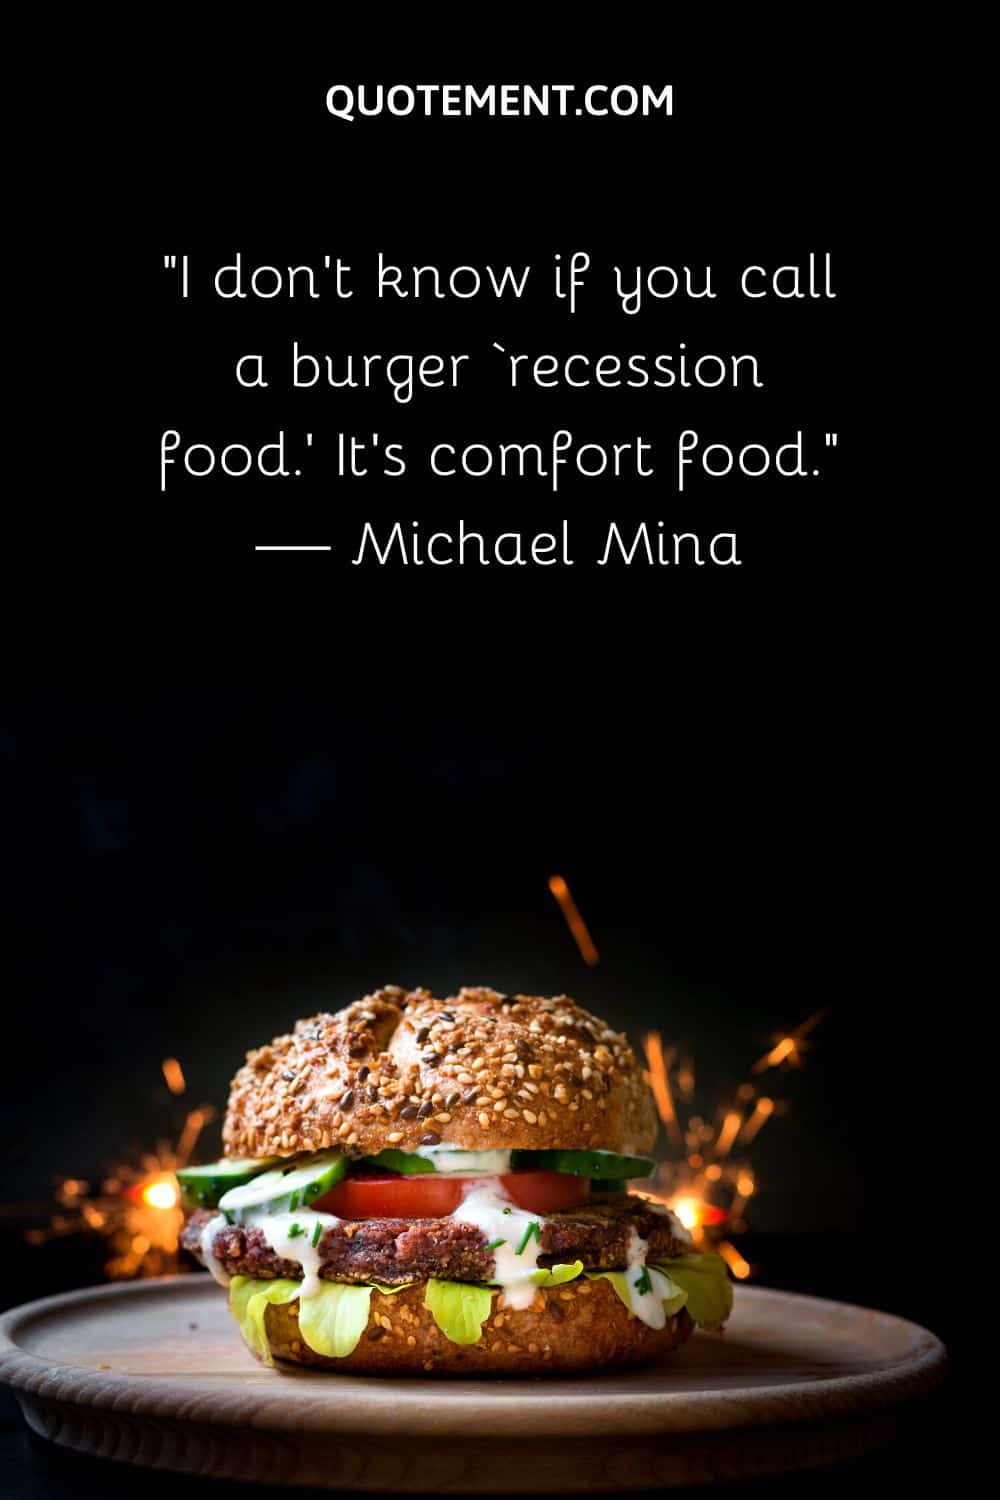 “I don’t know if you call a burger ‘recession food.’ It’s comfort food.” — Michael Mina